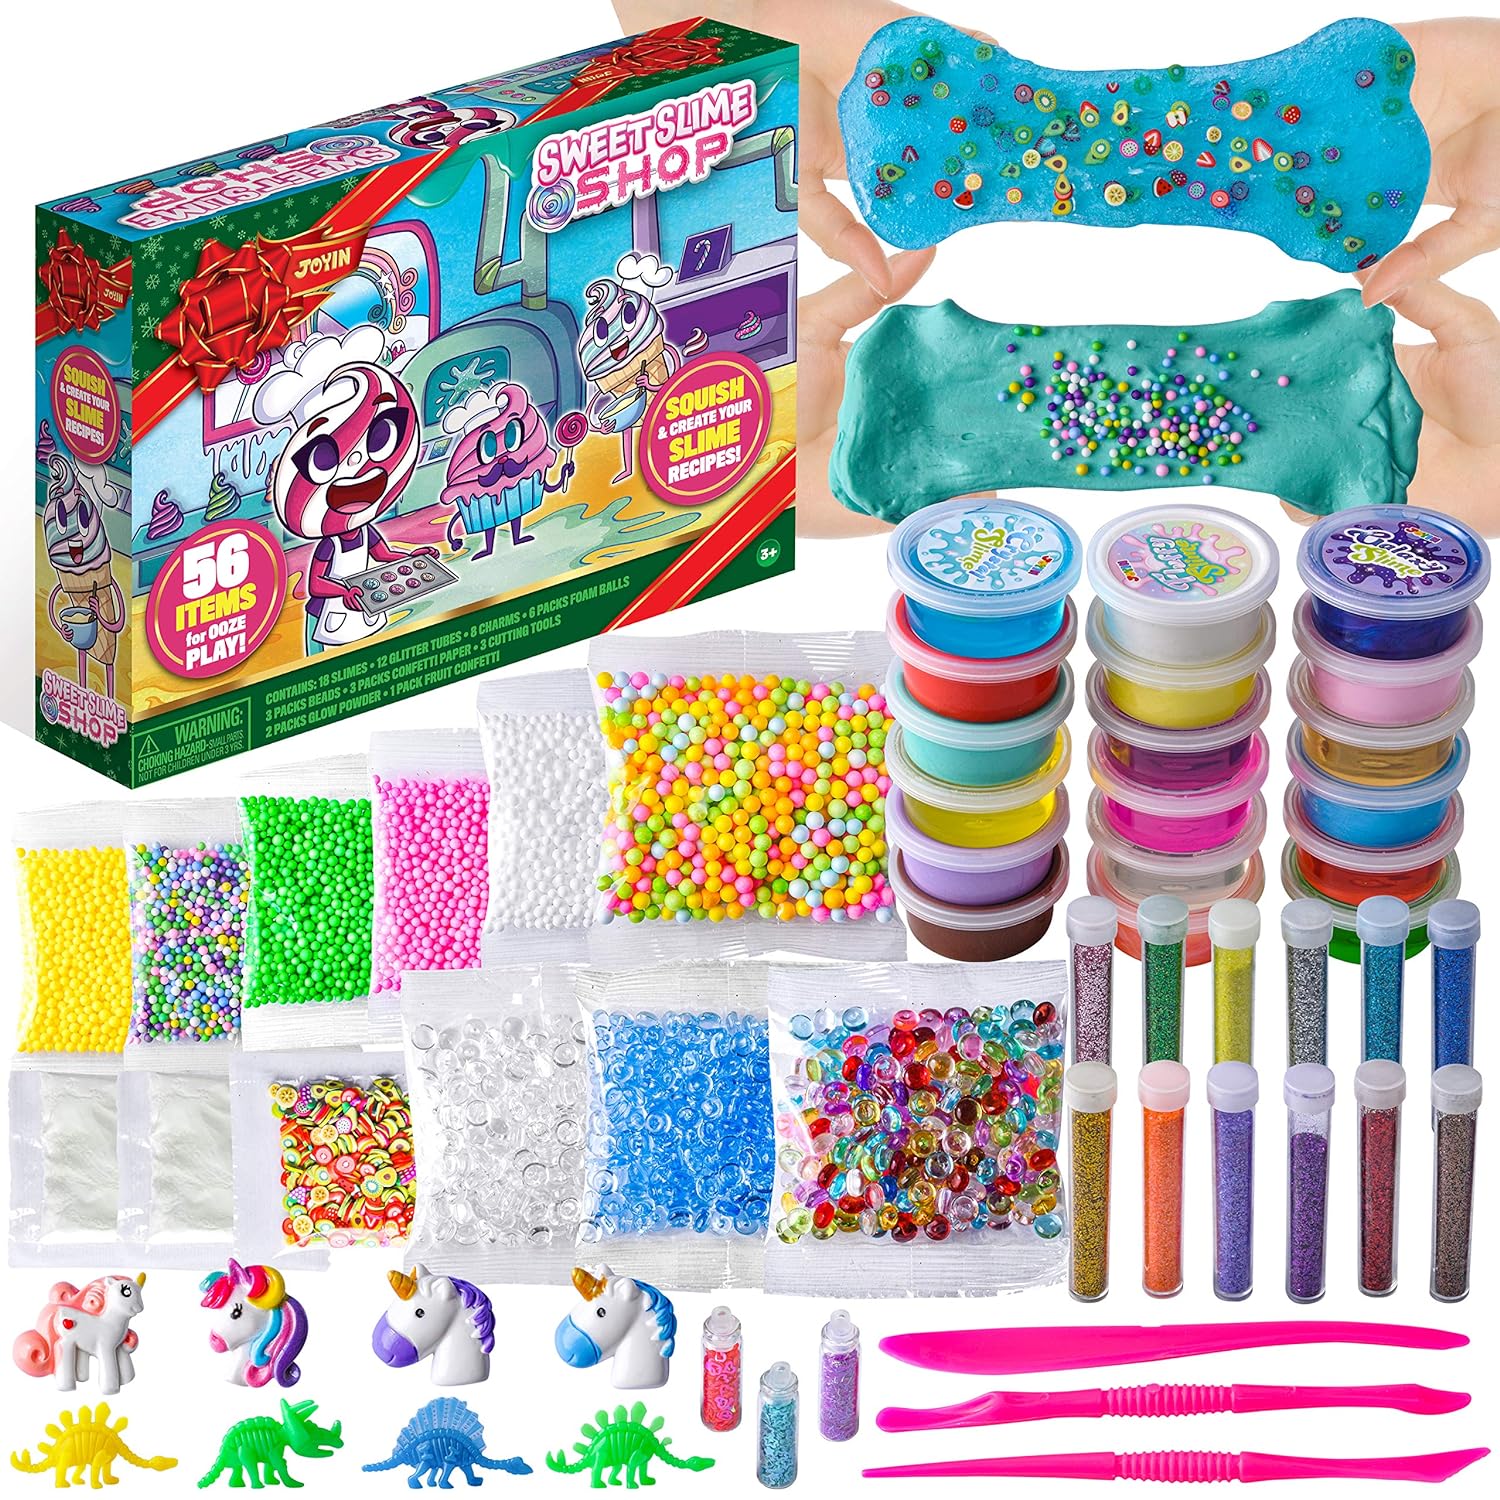 Great Choice Products 56 Pcs Slime Supplies Diy Slime Kit Making Set For  Kids, Kids Art Craft With 18 Slime And 38 Accessories, Fruit Slices, …